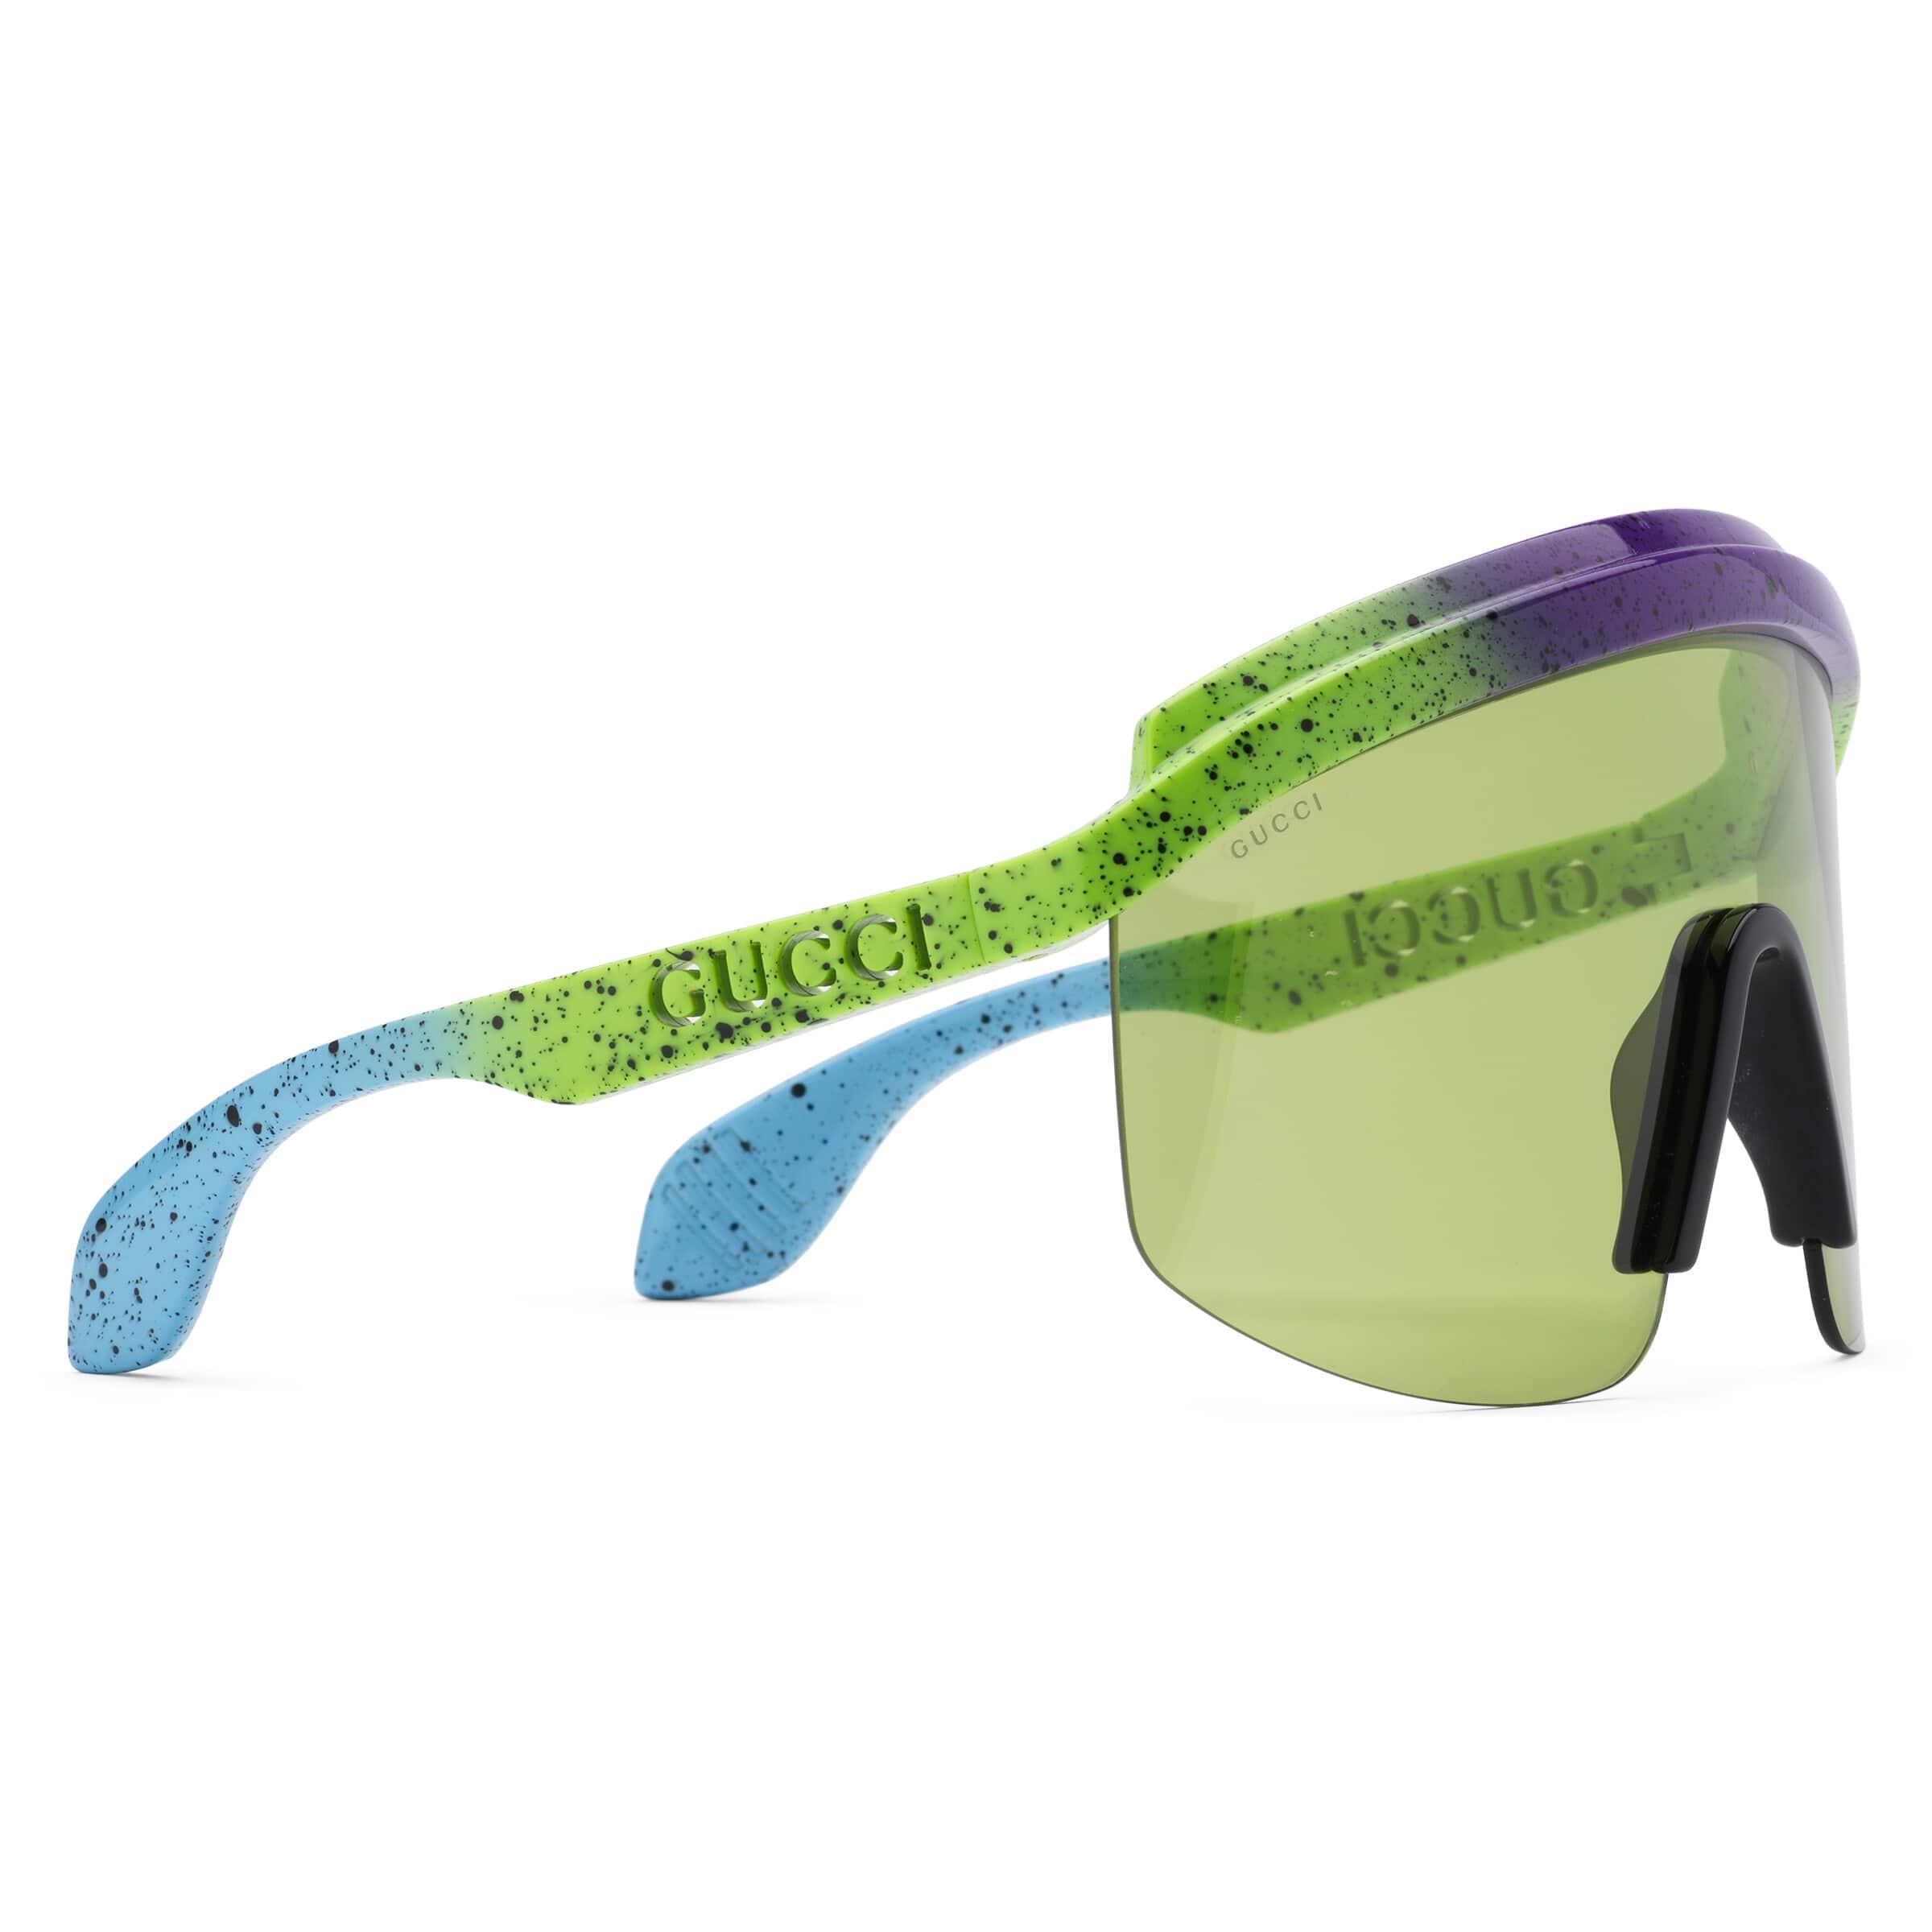 Gucci Mask Frame Sunglasses in Green | Lyst